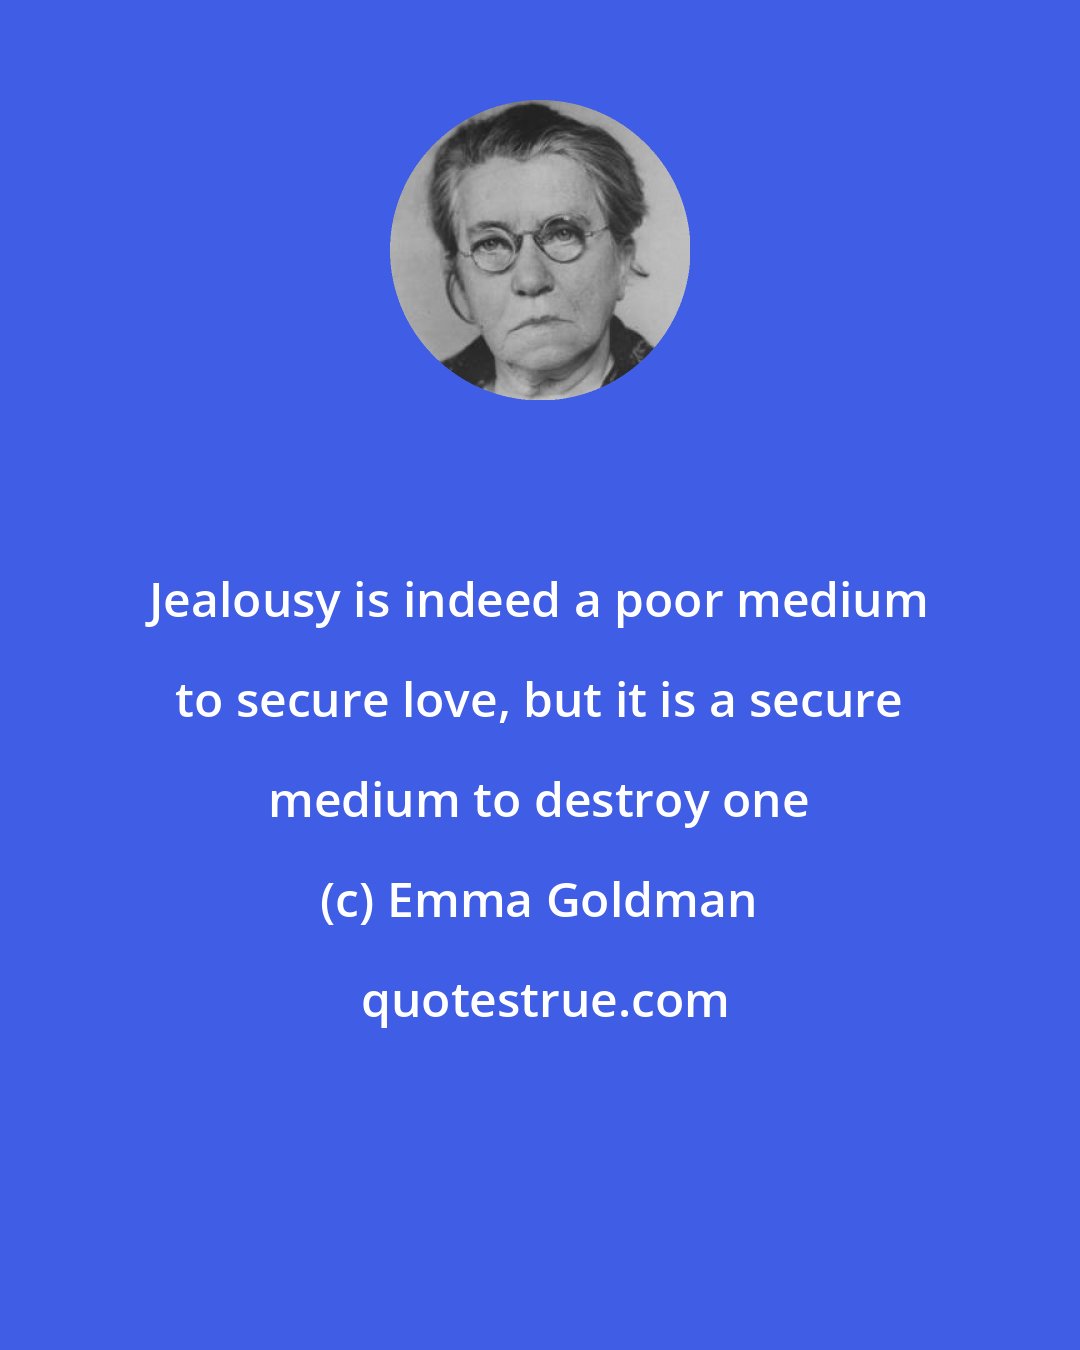 Emma Goldman: Jealousy is indeed a poor medium to secure love, but it is a secure medium to destroy one